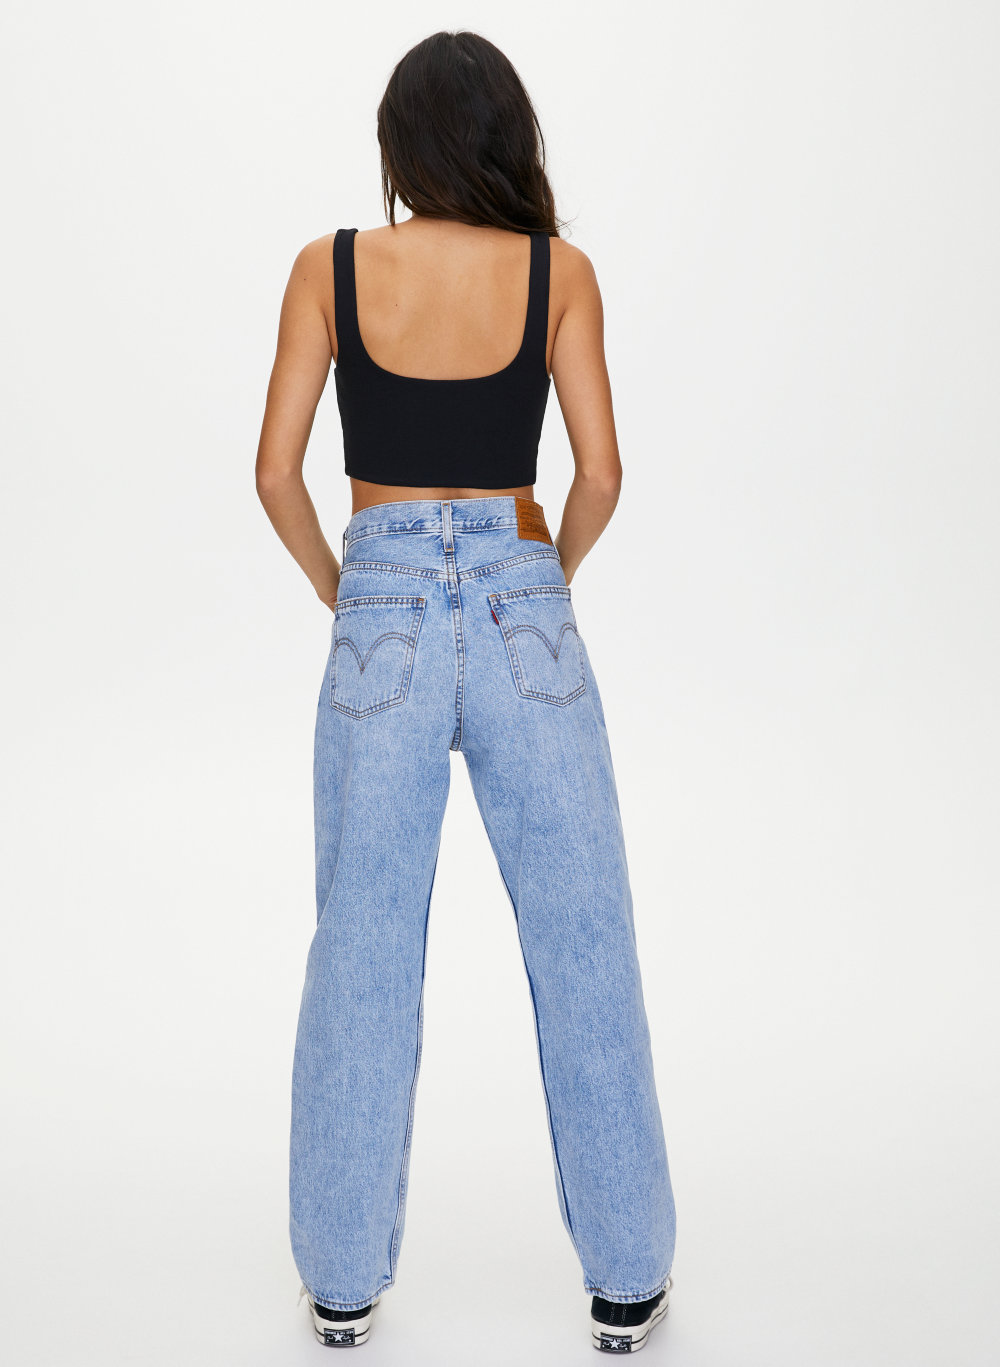 levis womens jeans canada